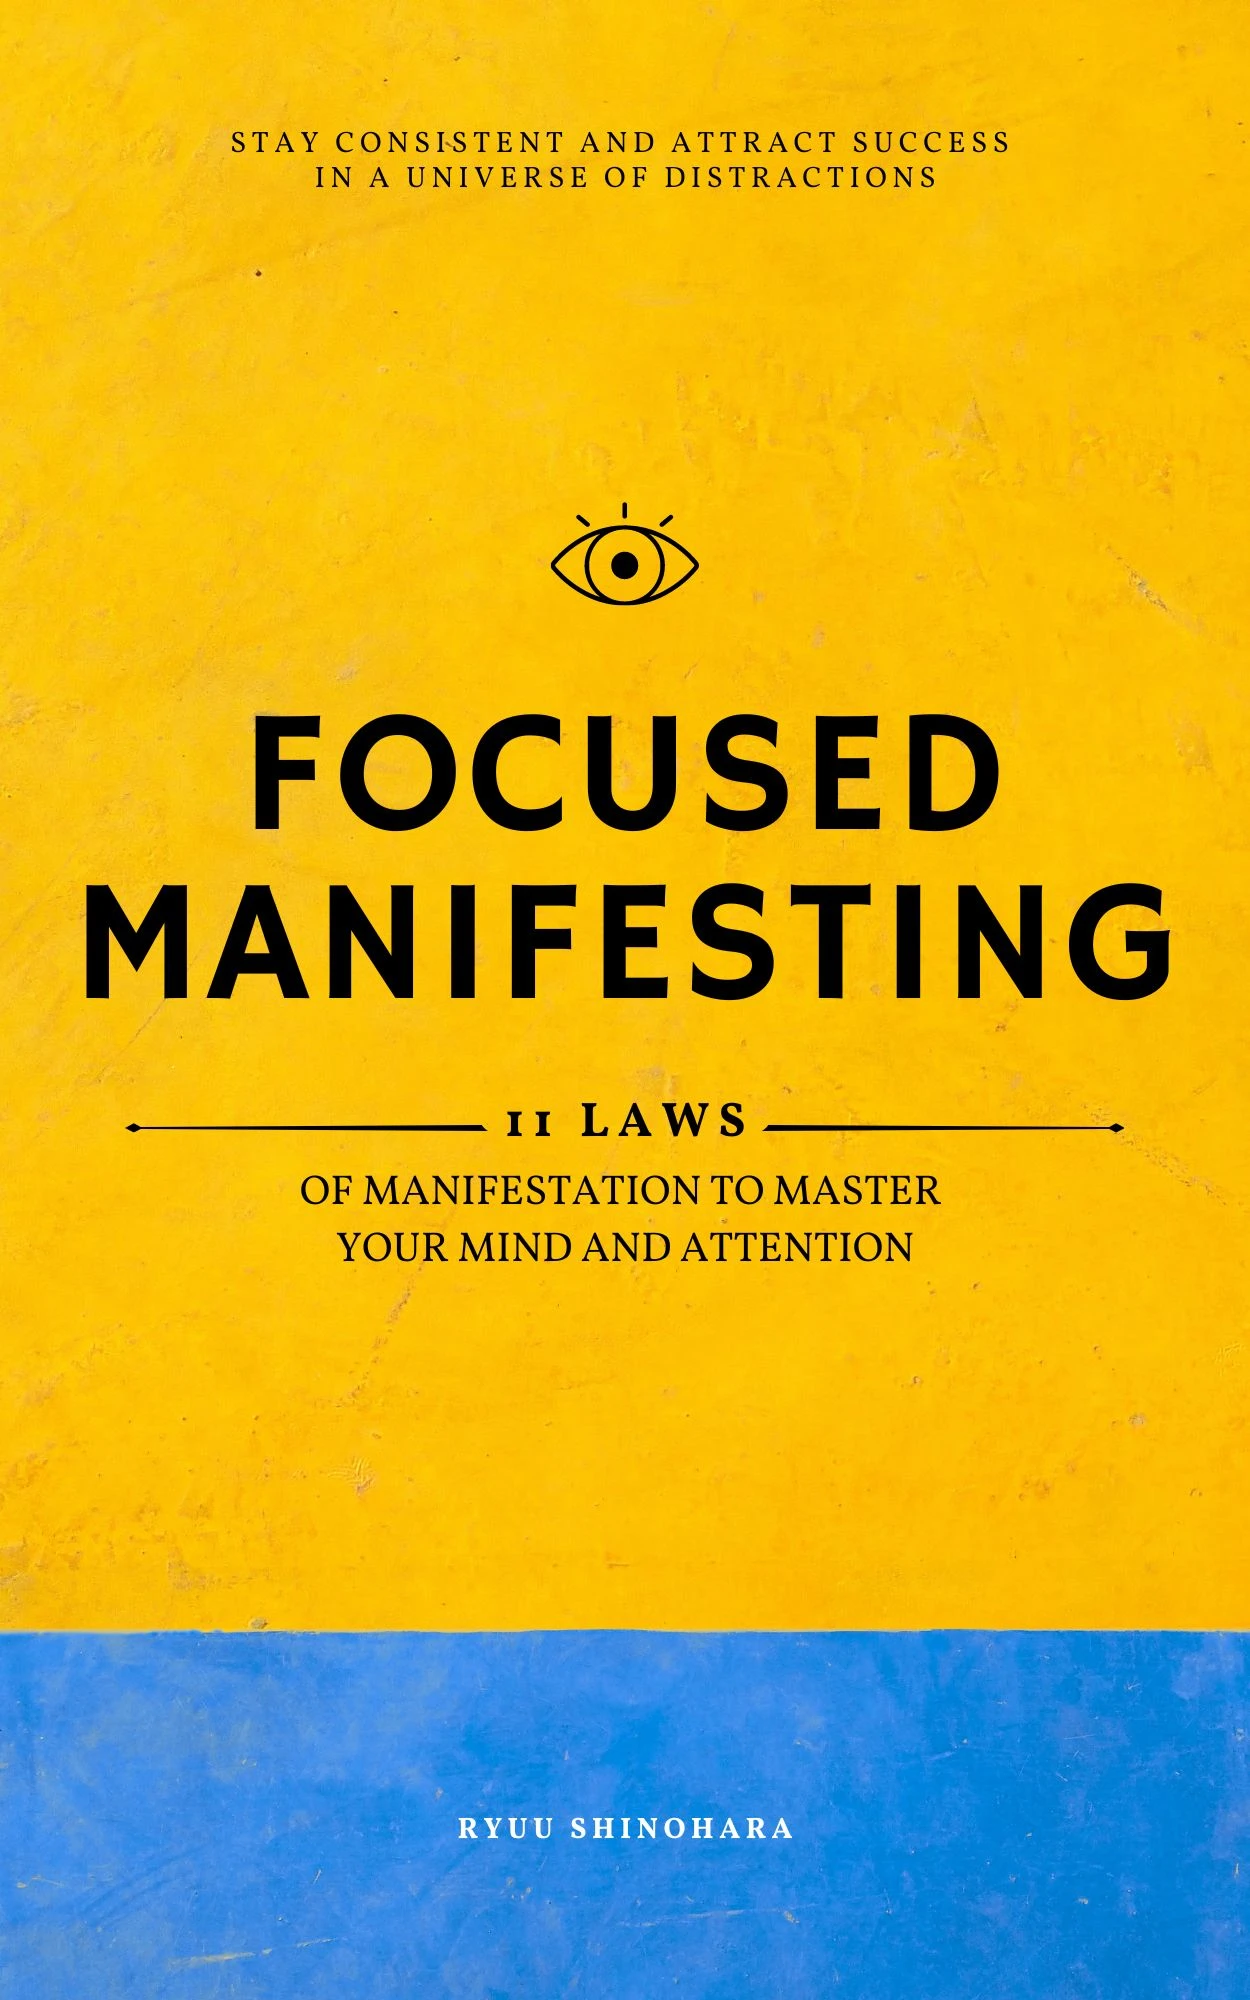 Focused Manifesting: 11 Laws of Manifestation to Master Your Mind and Attention – Stay Consistent and Attract Success in a Universe of Distractions (Includes Exercises)